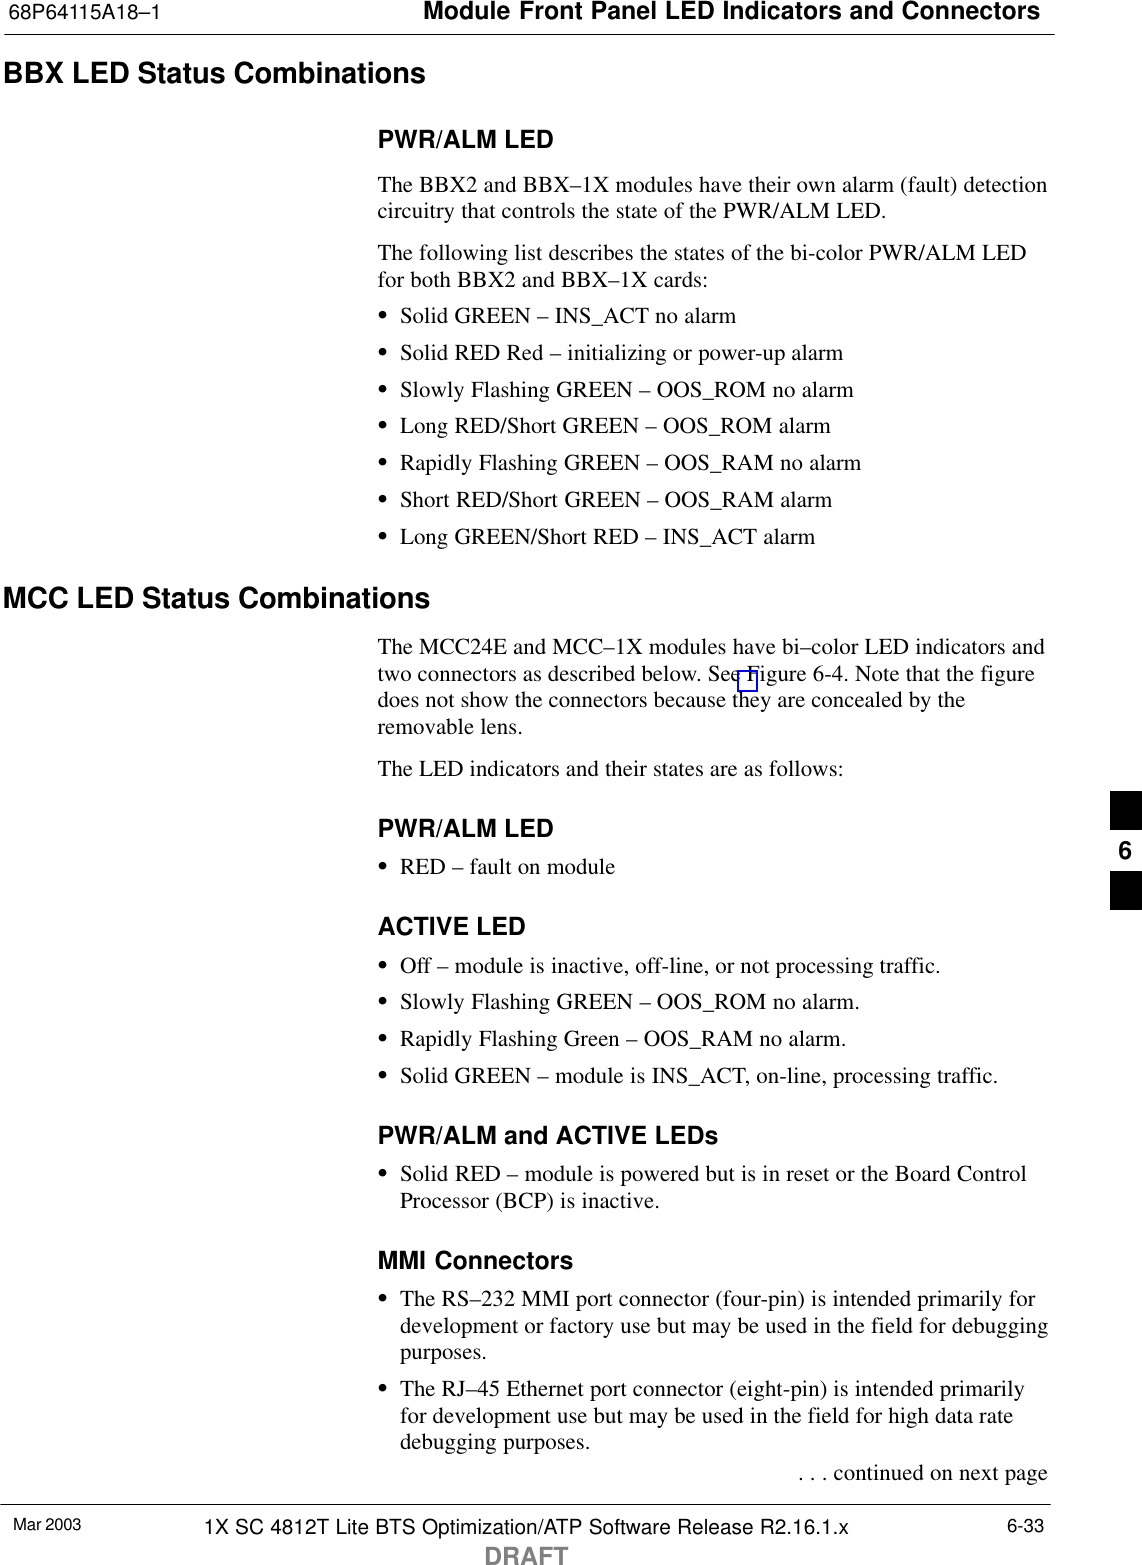 Module Front Panel LED Indicators and Connectors68P64115A18–1Mar 2003 1X SC 4812T Lite BTS Optimization/ATP Software Release R2.16.1.xDRAFT6-33BBX LED Status CombinationsPWR/ALM LEDThe BBX2 and BBX–1X modules have their own alarm (fault) detectioncircuitry that controls the state of the PWR/ALM LED.The following list describes the states of the bi-color PWR/ALM LEDfor both BBX2 and BBX–1X cards:SSolid GREEN – INS_ACT no alarmSSolid RED Red – initializing or power-up alarmSSlowly Flashing GREEN – OOS_ROM no alarmSLong RED/Short GREEN – OOS_ROM alarmSRapidly Flashing GREEN – OOS_RAM no alarmSShort RED/Short GREEN – OOS_RAM alarmSLong GREEN/Short RED – INS_ACT alarmMCC LED Status CombinationsThe MCC24E and MCC–1X modules have bi–color LED indicators andtwo connectors as described below. See Figure 6-4. Note that the figuredoes not show the connectors because they are concealed by theremovable lens.The LED indicators and their states are as follows:PWR/ALM LEDSRED – fault on moduleACTIVE LEDSOff – module is inactive, off-line, or not processing traffic.SSlowly Flashing GREEN – OOS_ROM no alarm.SRapidly Flashing Green – OOS_RAM no alarm.SSolid GREEN – module is INS_ACT, on-line, processing traffic.PWR/ALM and ACTIVE LEDsSSolid RED – module is powered but is in reset or the Board ControlProcessor (BCP) is inactive.MMI ConnectorsSThe RS–232 MMI port connector (four-pin) is intended primarily fordevelopment or factory use but may be used in the field for debuggingpurposes.SThe RJ–45 Ethernet port connector (eight-pin) is intended primarilyfor development use but may be used in the field for high data ratedebugging purposes. . . . continued on next page6